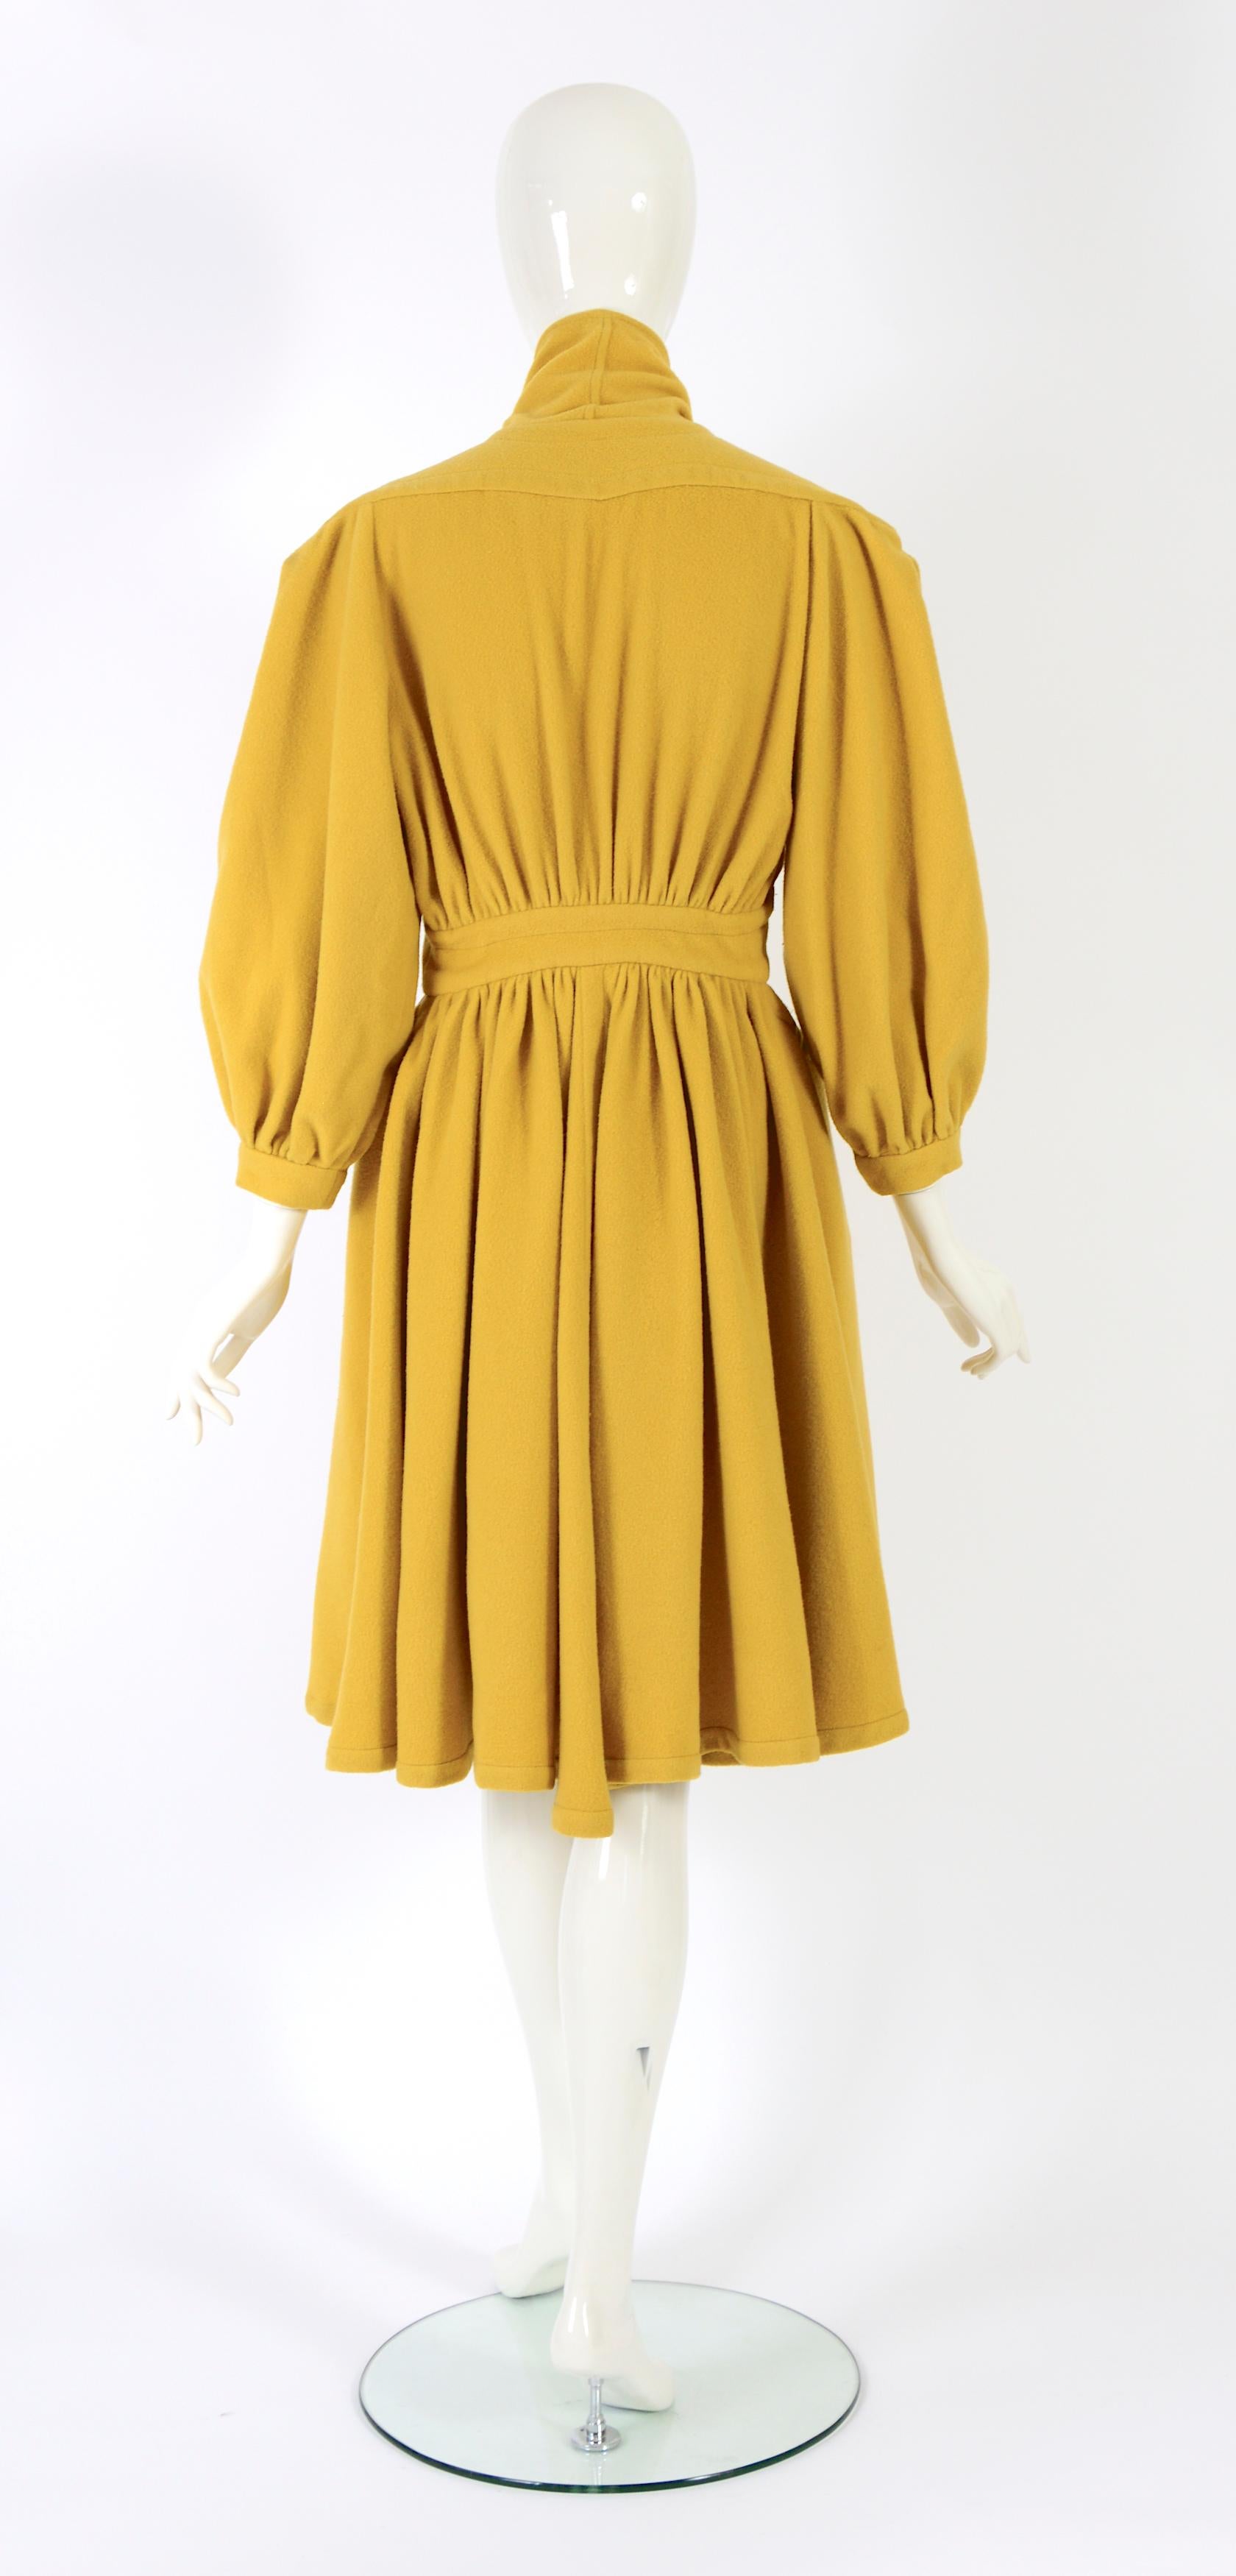 Thierry Mugler F/W 1983 runway collectable mustard yellow wool coat 1